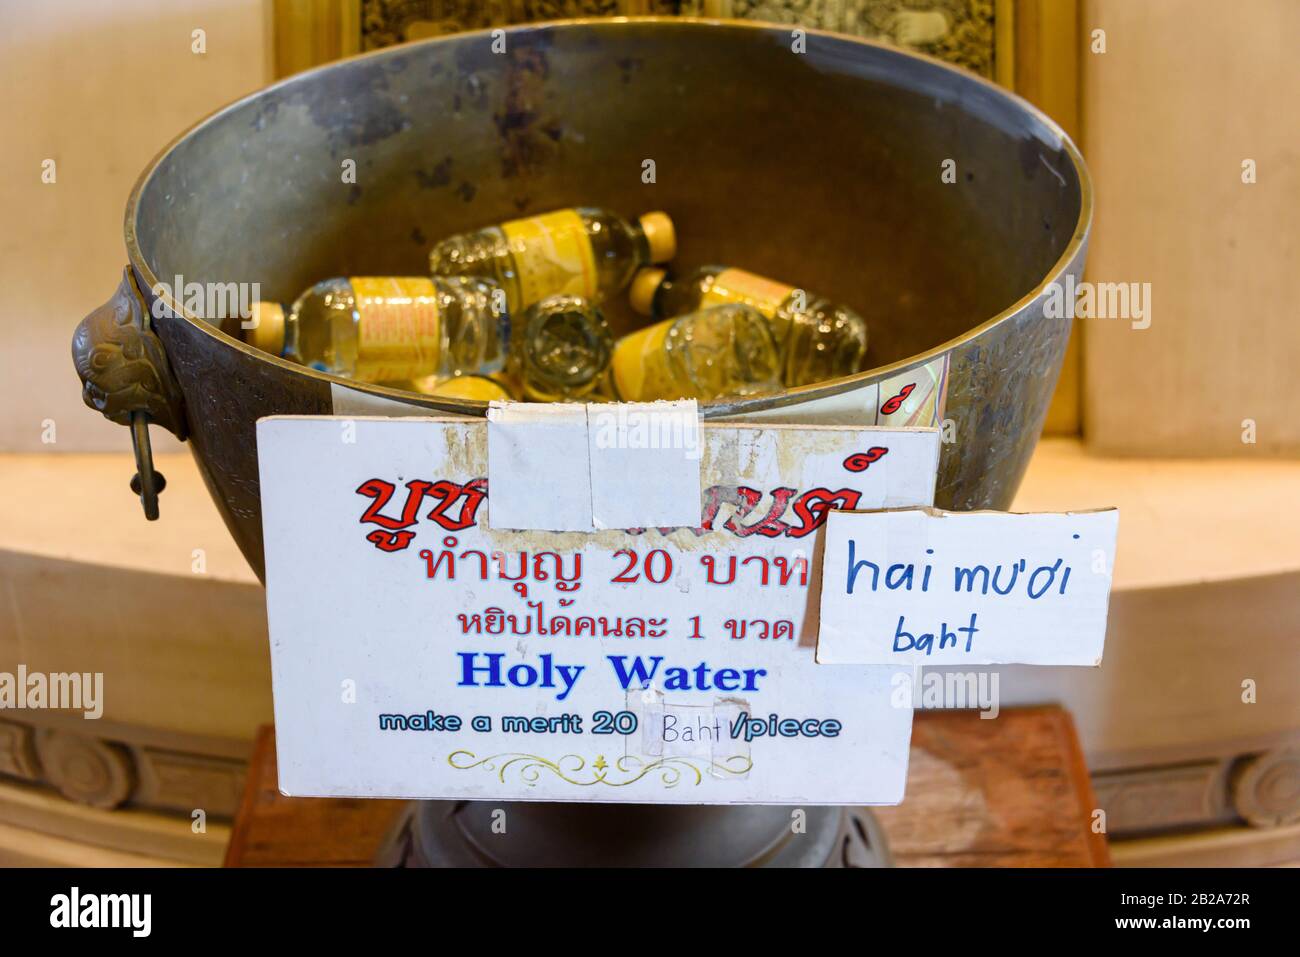 Bottles of 'holy water' for sale at a Buddhist temple for tourists and visitors, Bangkok, Thailand Stock Photo